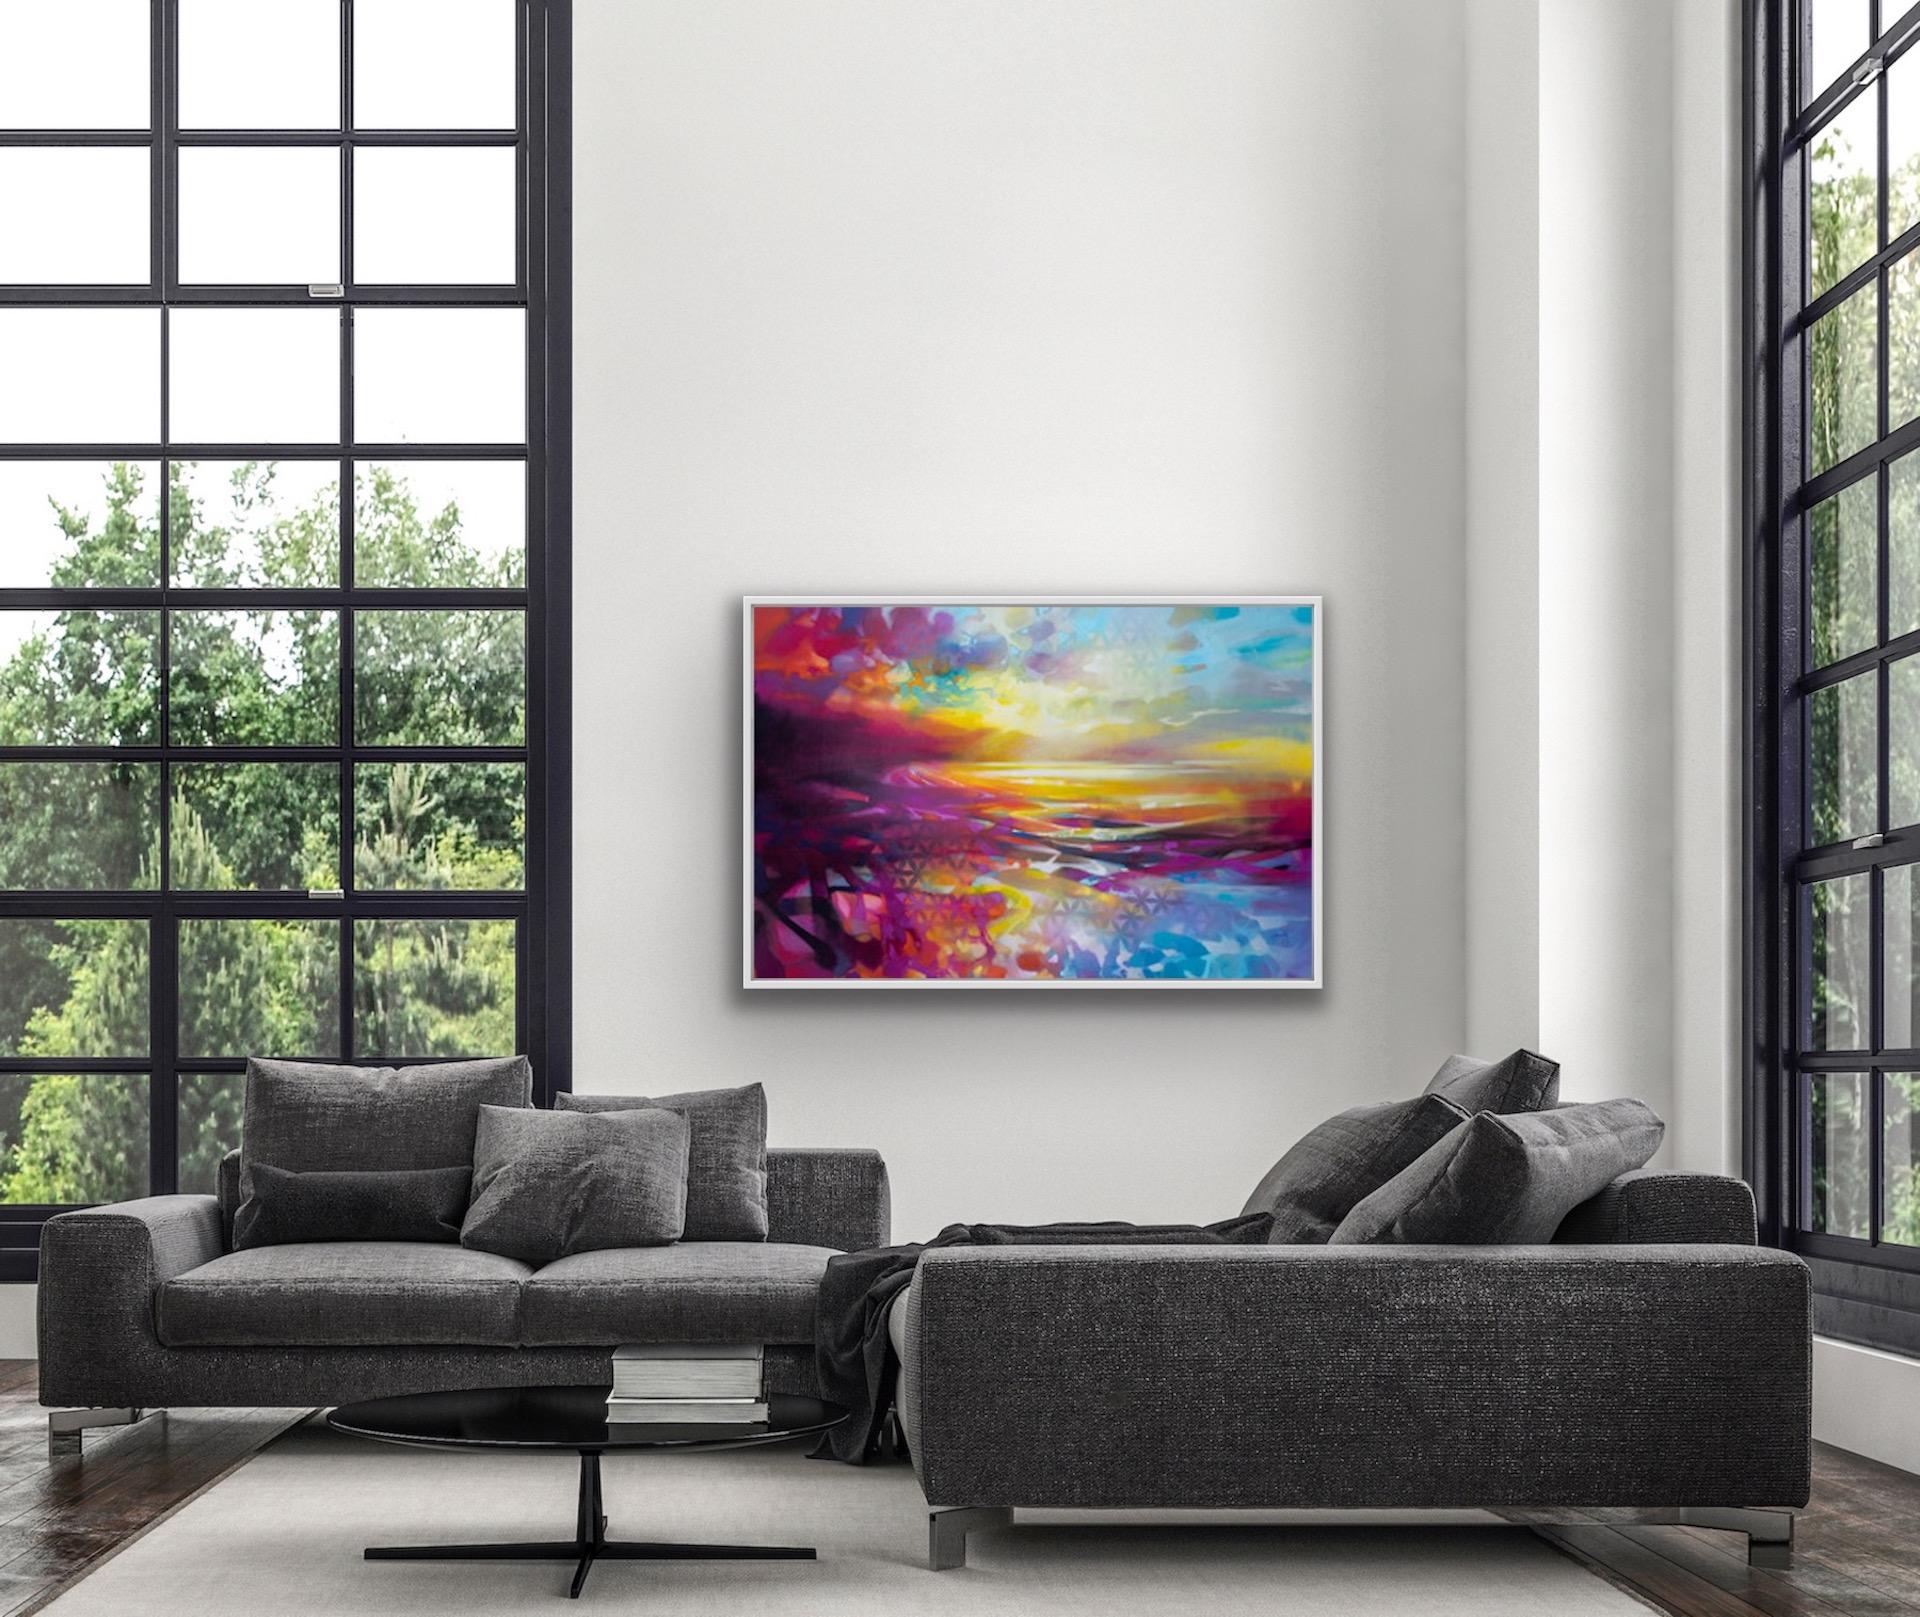 Scott Naismith
Loch Creation III
Original Painting
Oil and Spray Paint on Linen
Canvas Size: H 80cm x W 120cm
Framed Size: H 91cm x W 131cm
Signed
Sold Framed
Please note that any insitu images are purely a depiction of how a piece may look.

Loch